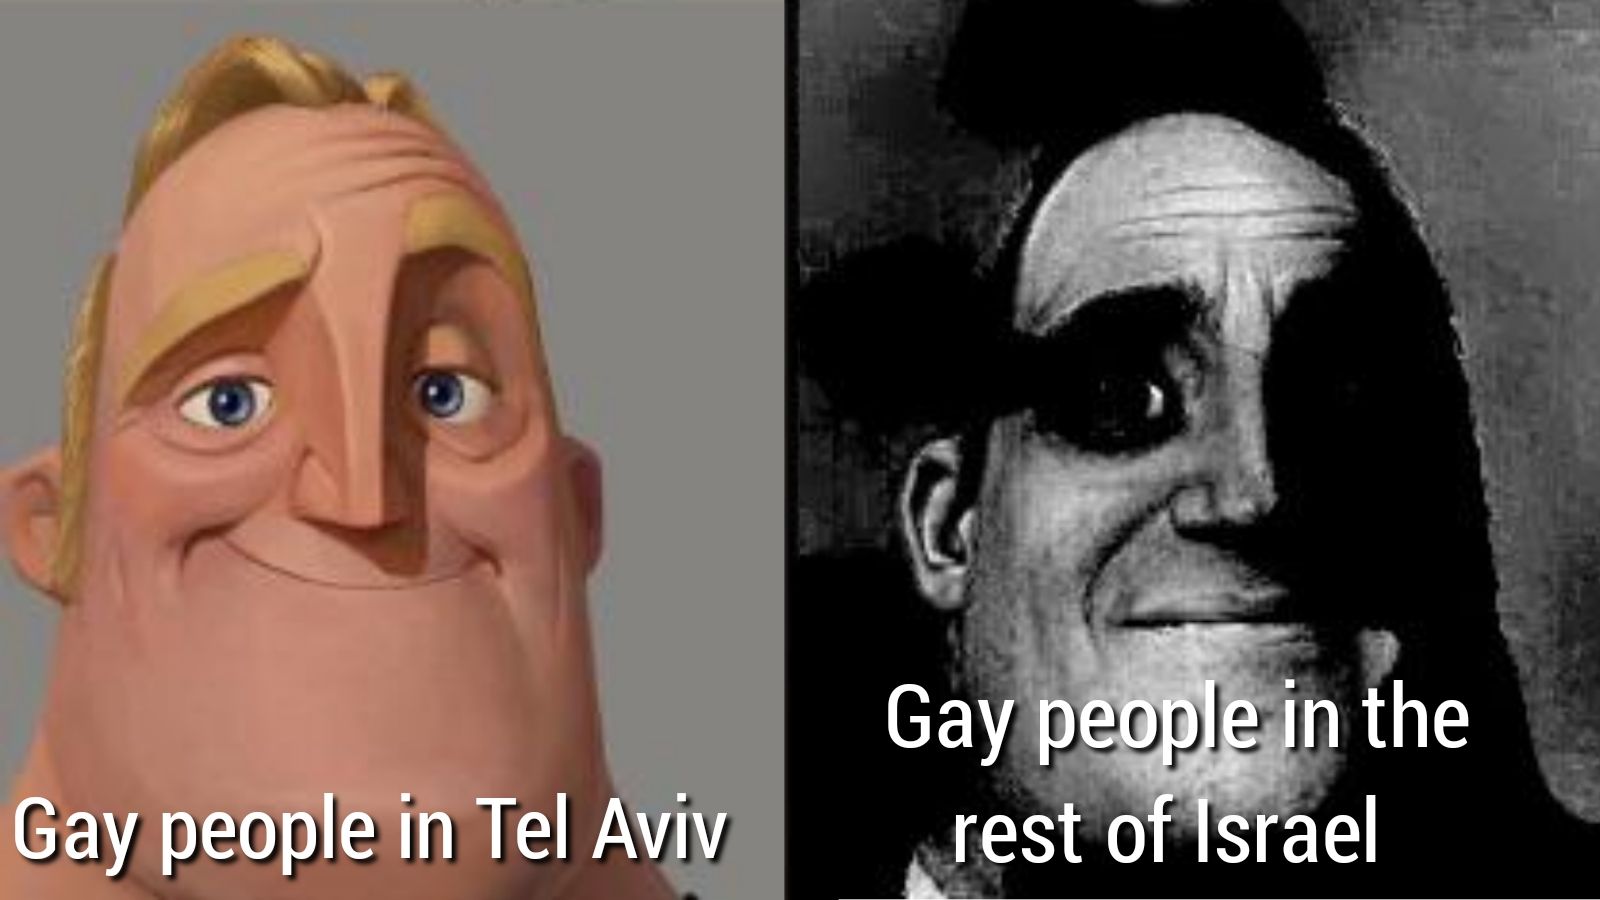 Oy vey, they are gay!